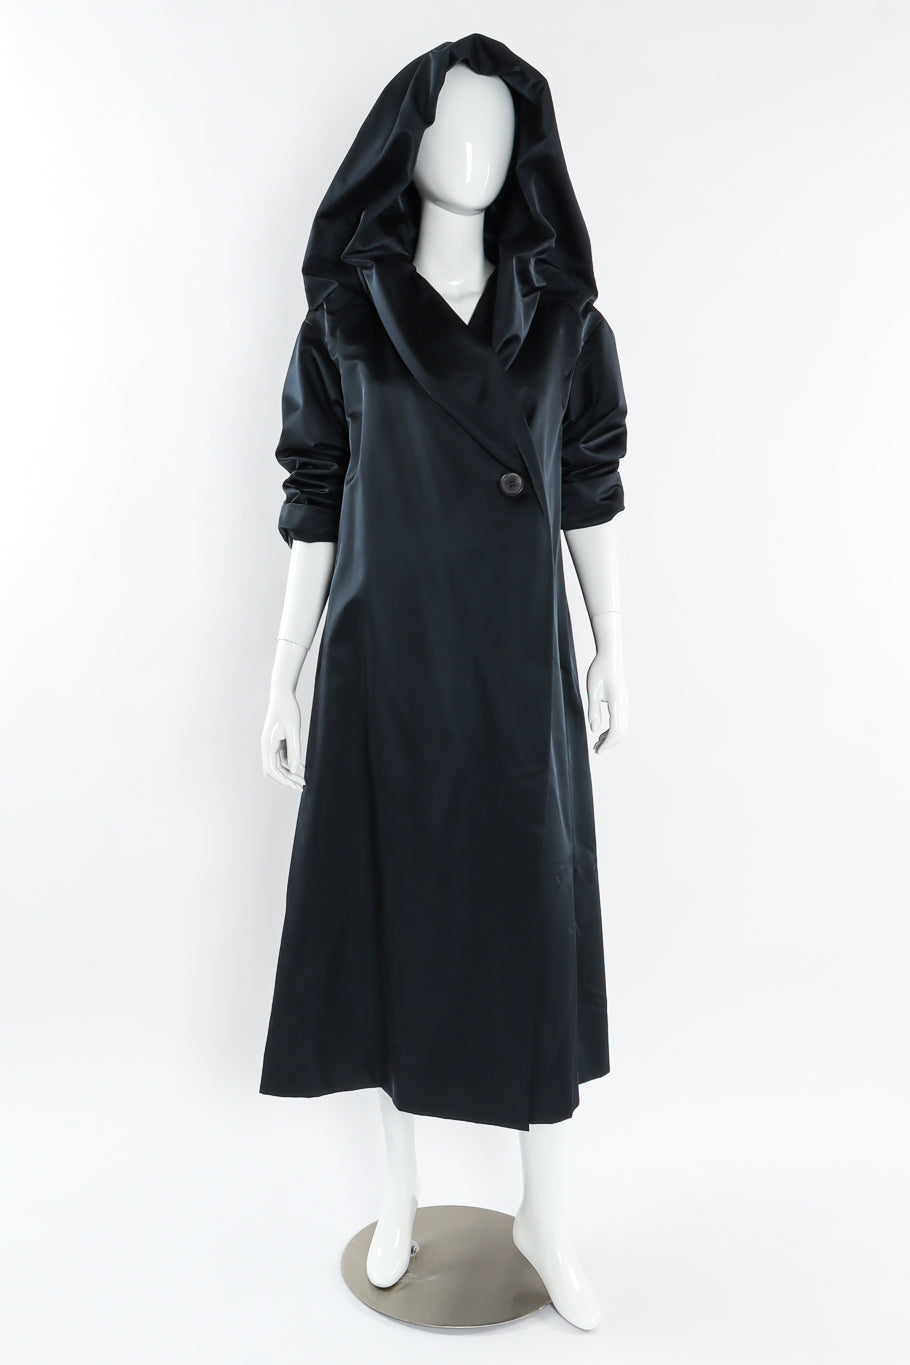 Vintage Issey Miyake Hooded Satin Overcoat mannequin front sleeves rolled up @ Recess LA